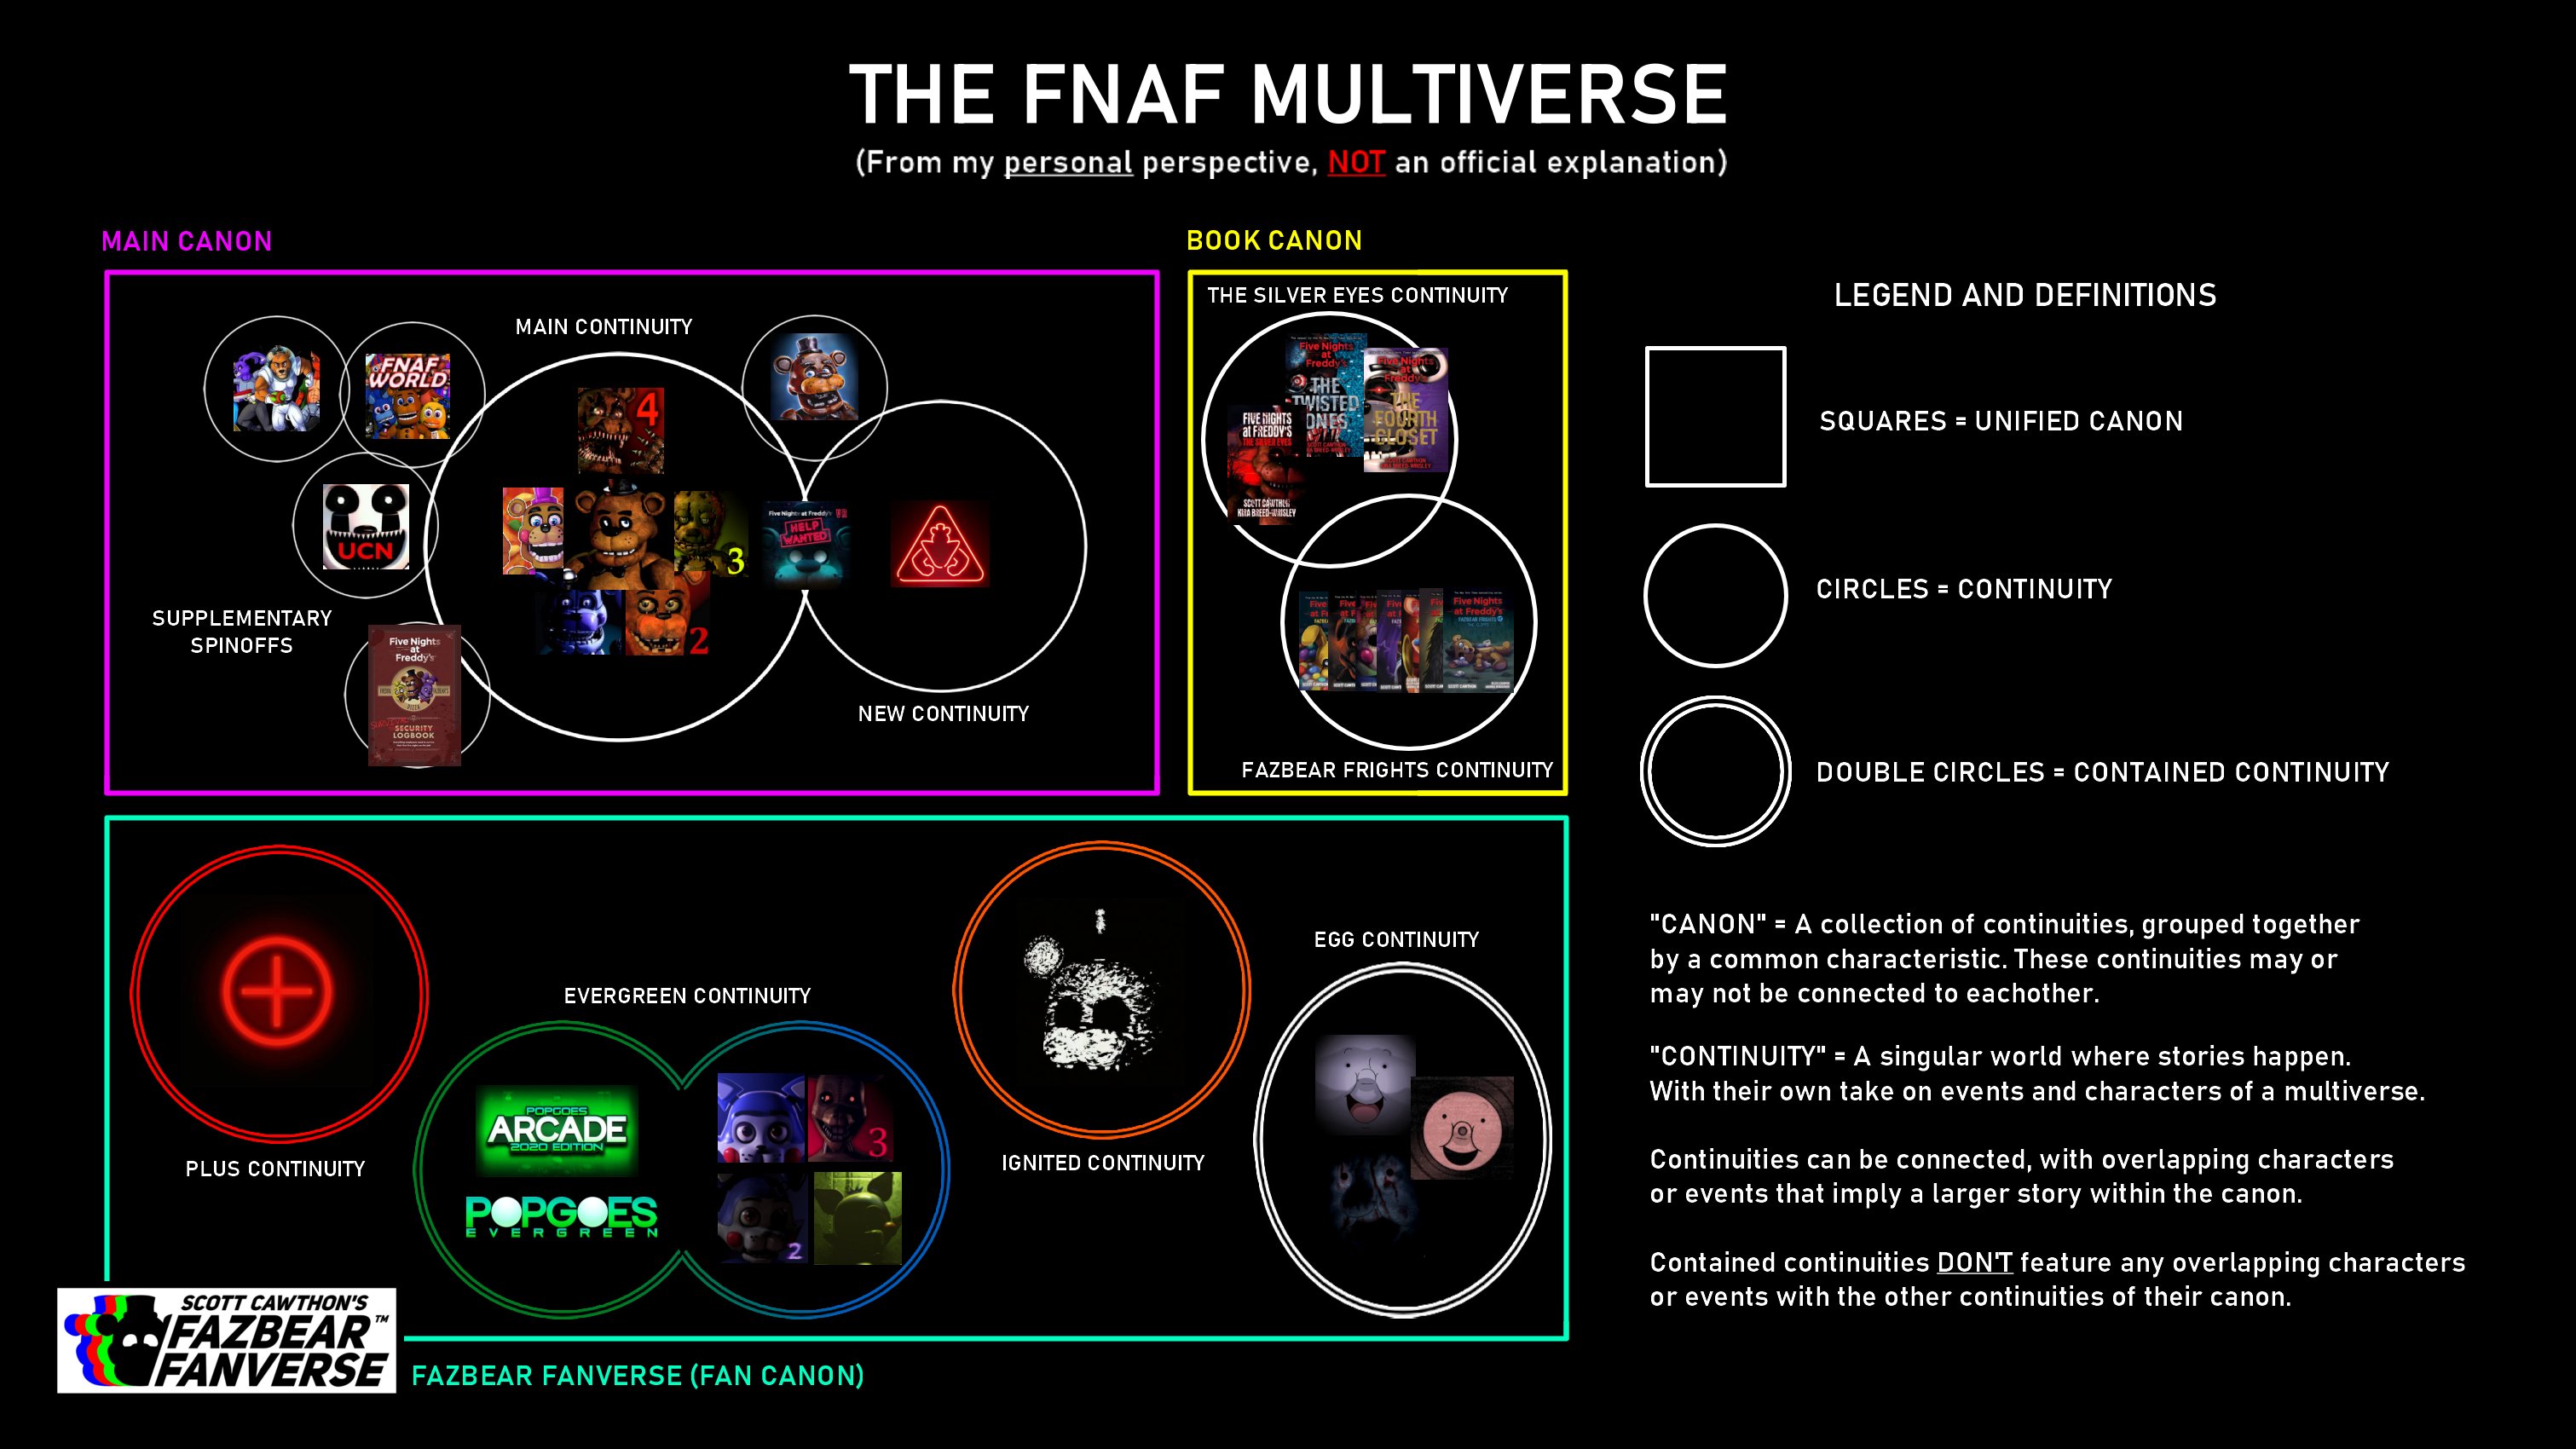 Five Nights at Freddy's 4 Story and Timeline! 